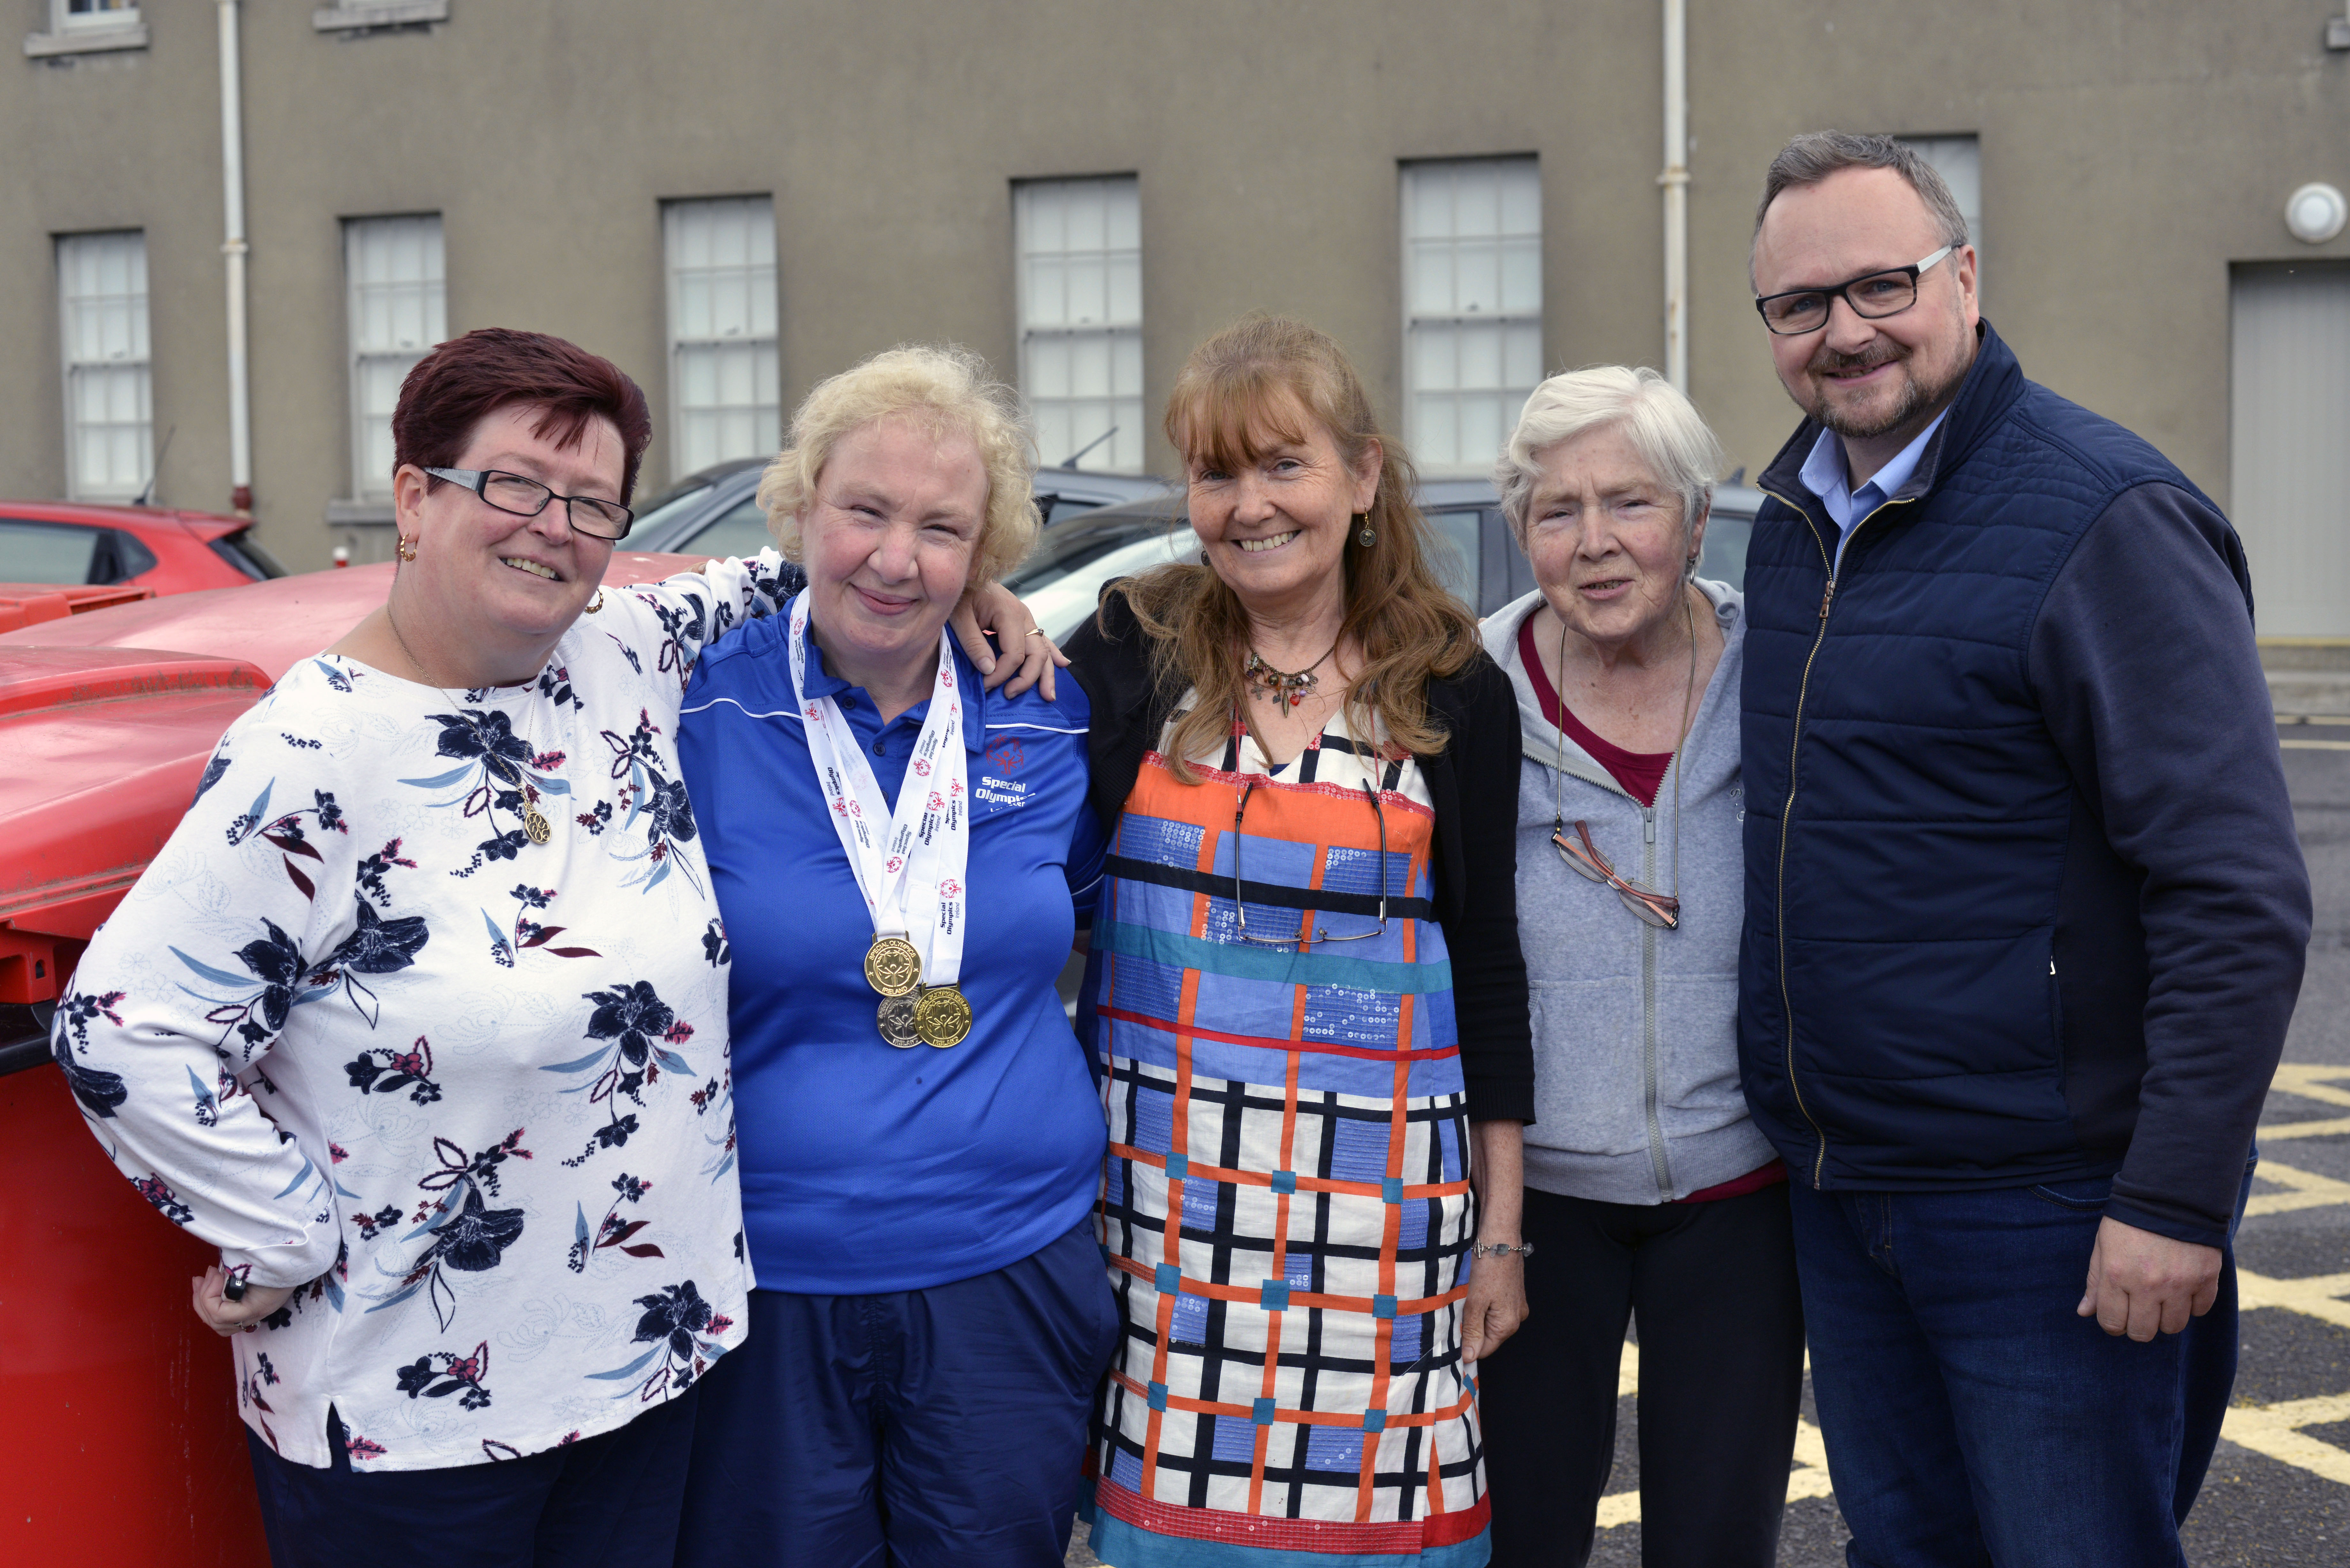 Dalgan rejoices with its Special Olympics medallist